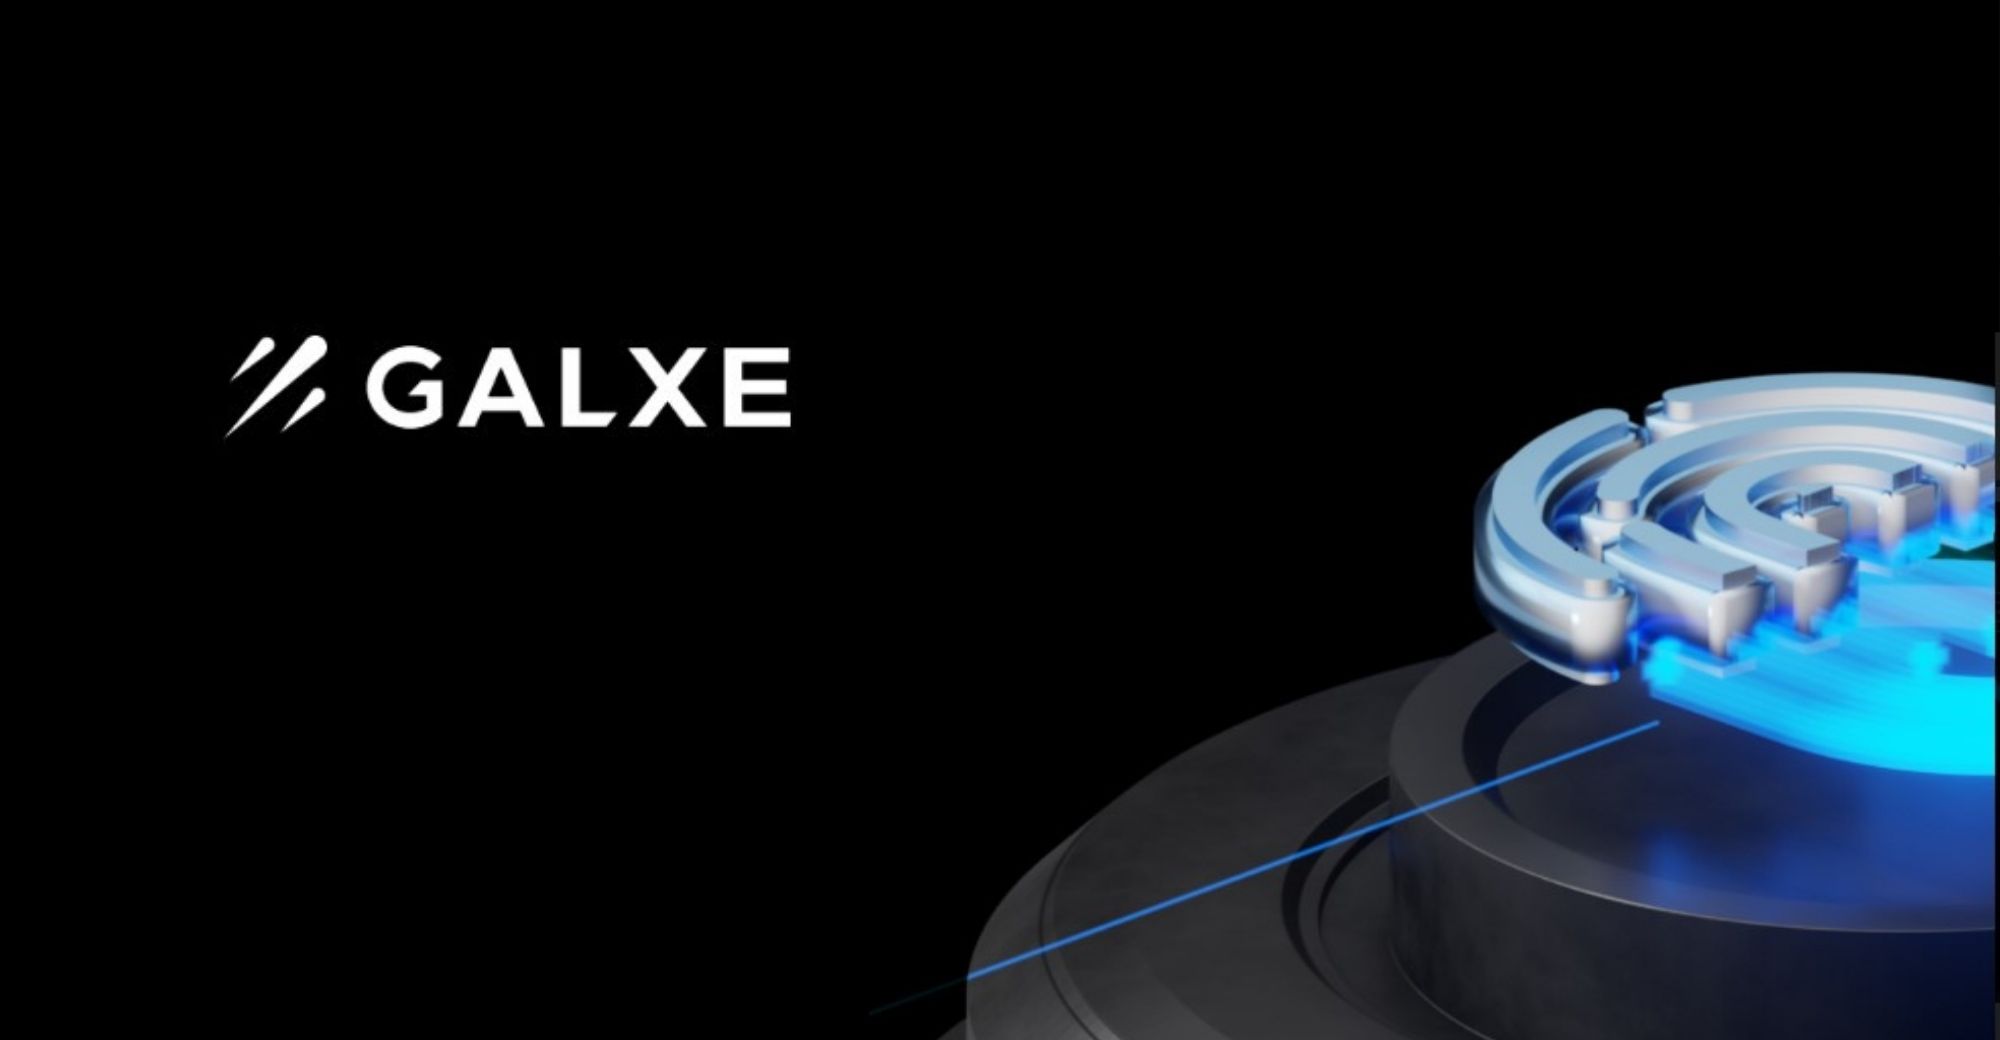 From Project Galaxy to Galxe: Rebranding and Evolving